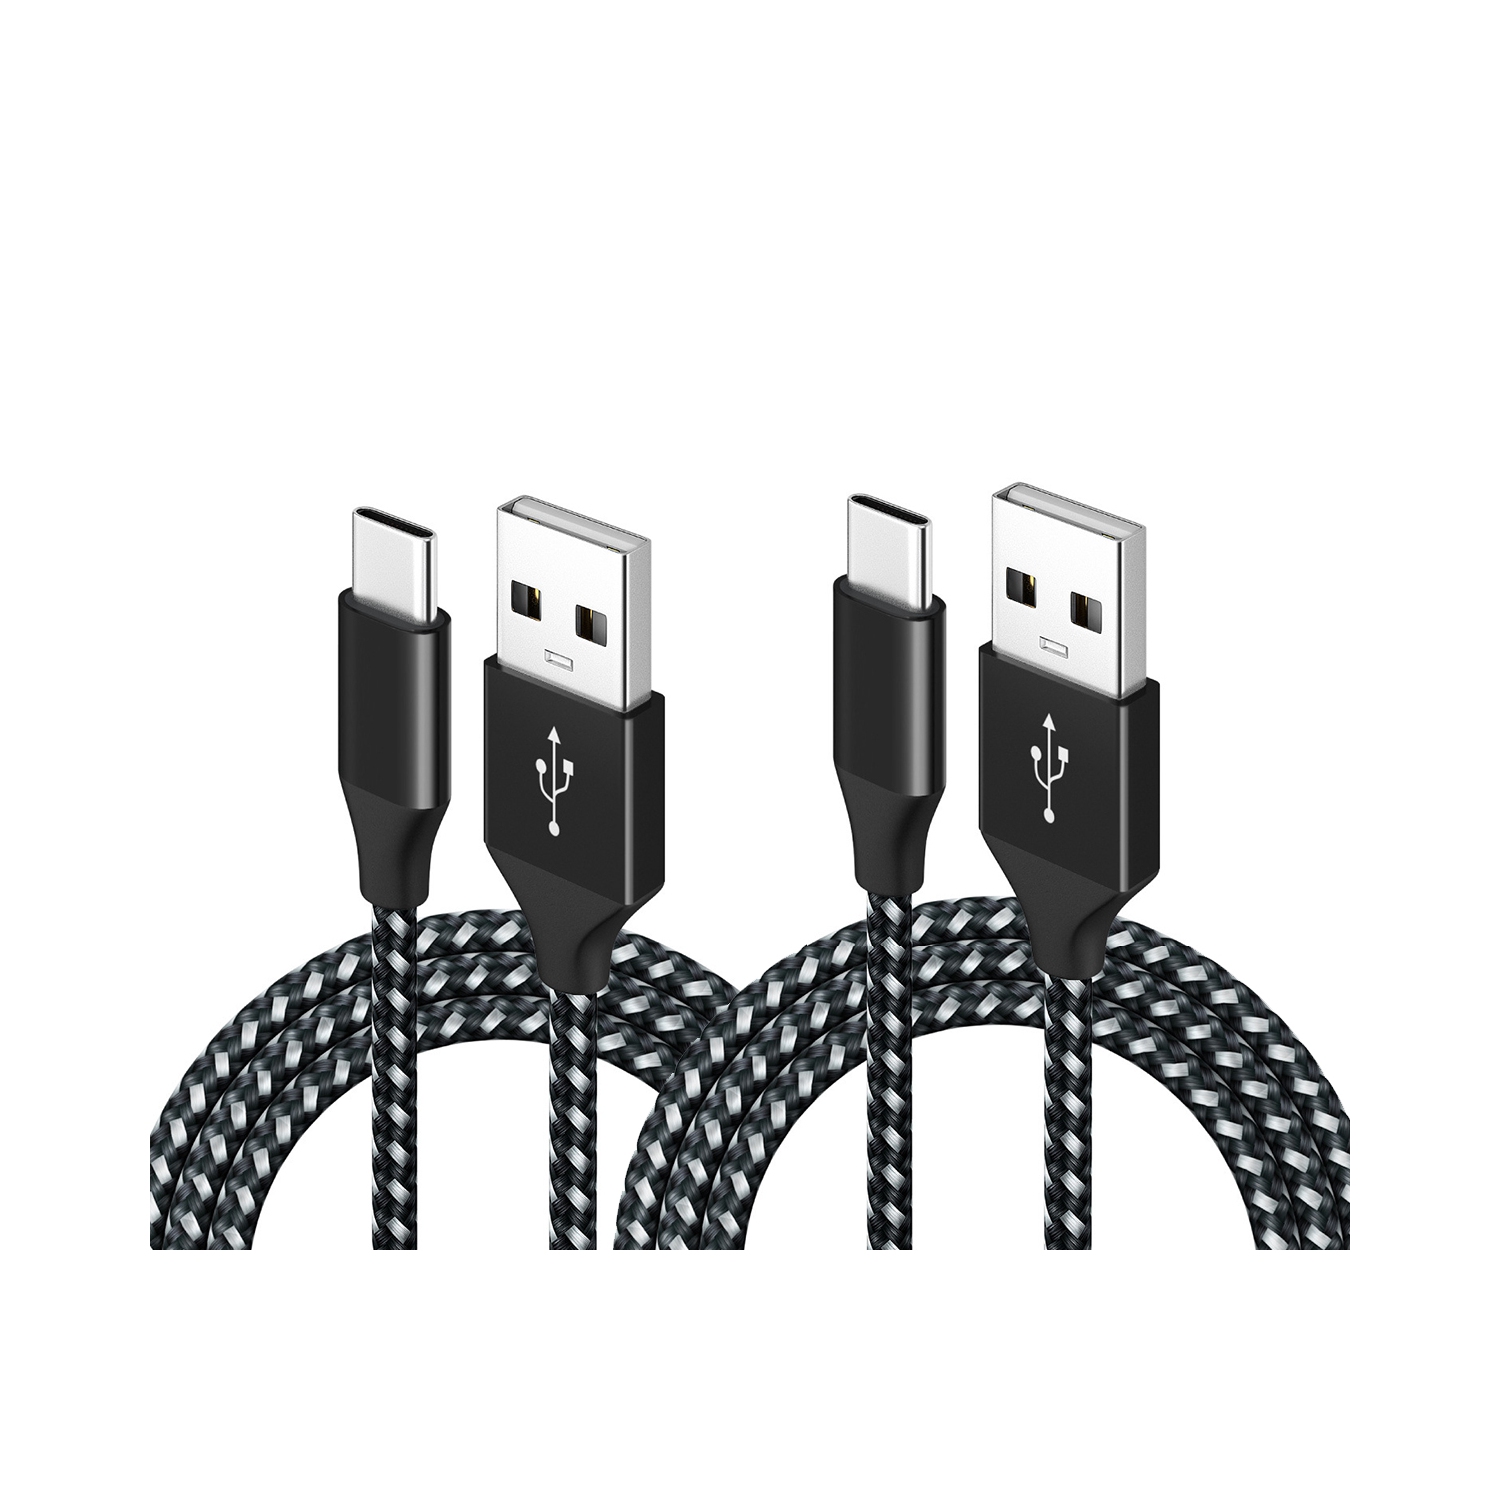 navor 2-Pack 10FT USB Type-C Charging Cable Compatible with Samsung Galaxy S10/S10 Plus/S9/Note 10/9/8/S8/S8+, Google Pixel, LG, Huawei, Motorola Nylon Braided Fast Charging and Data Transfer Cord